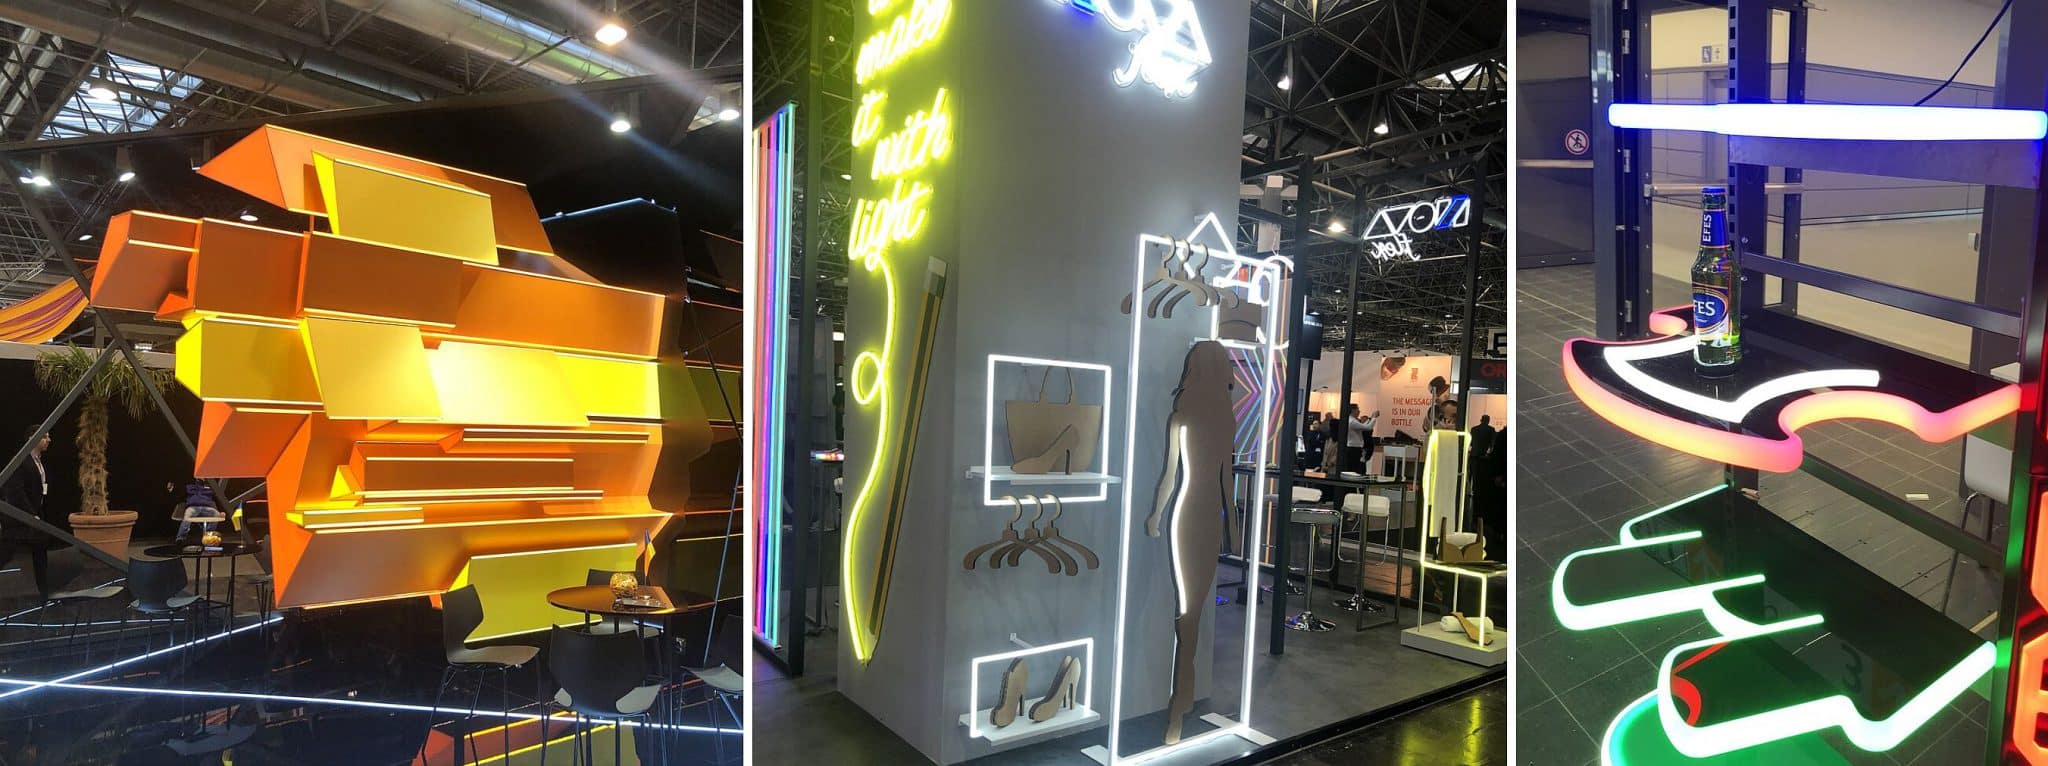 The Moss team observed many trends at EuroShop